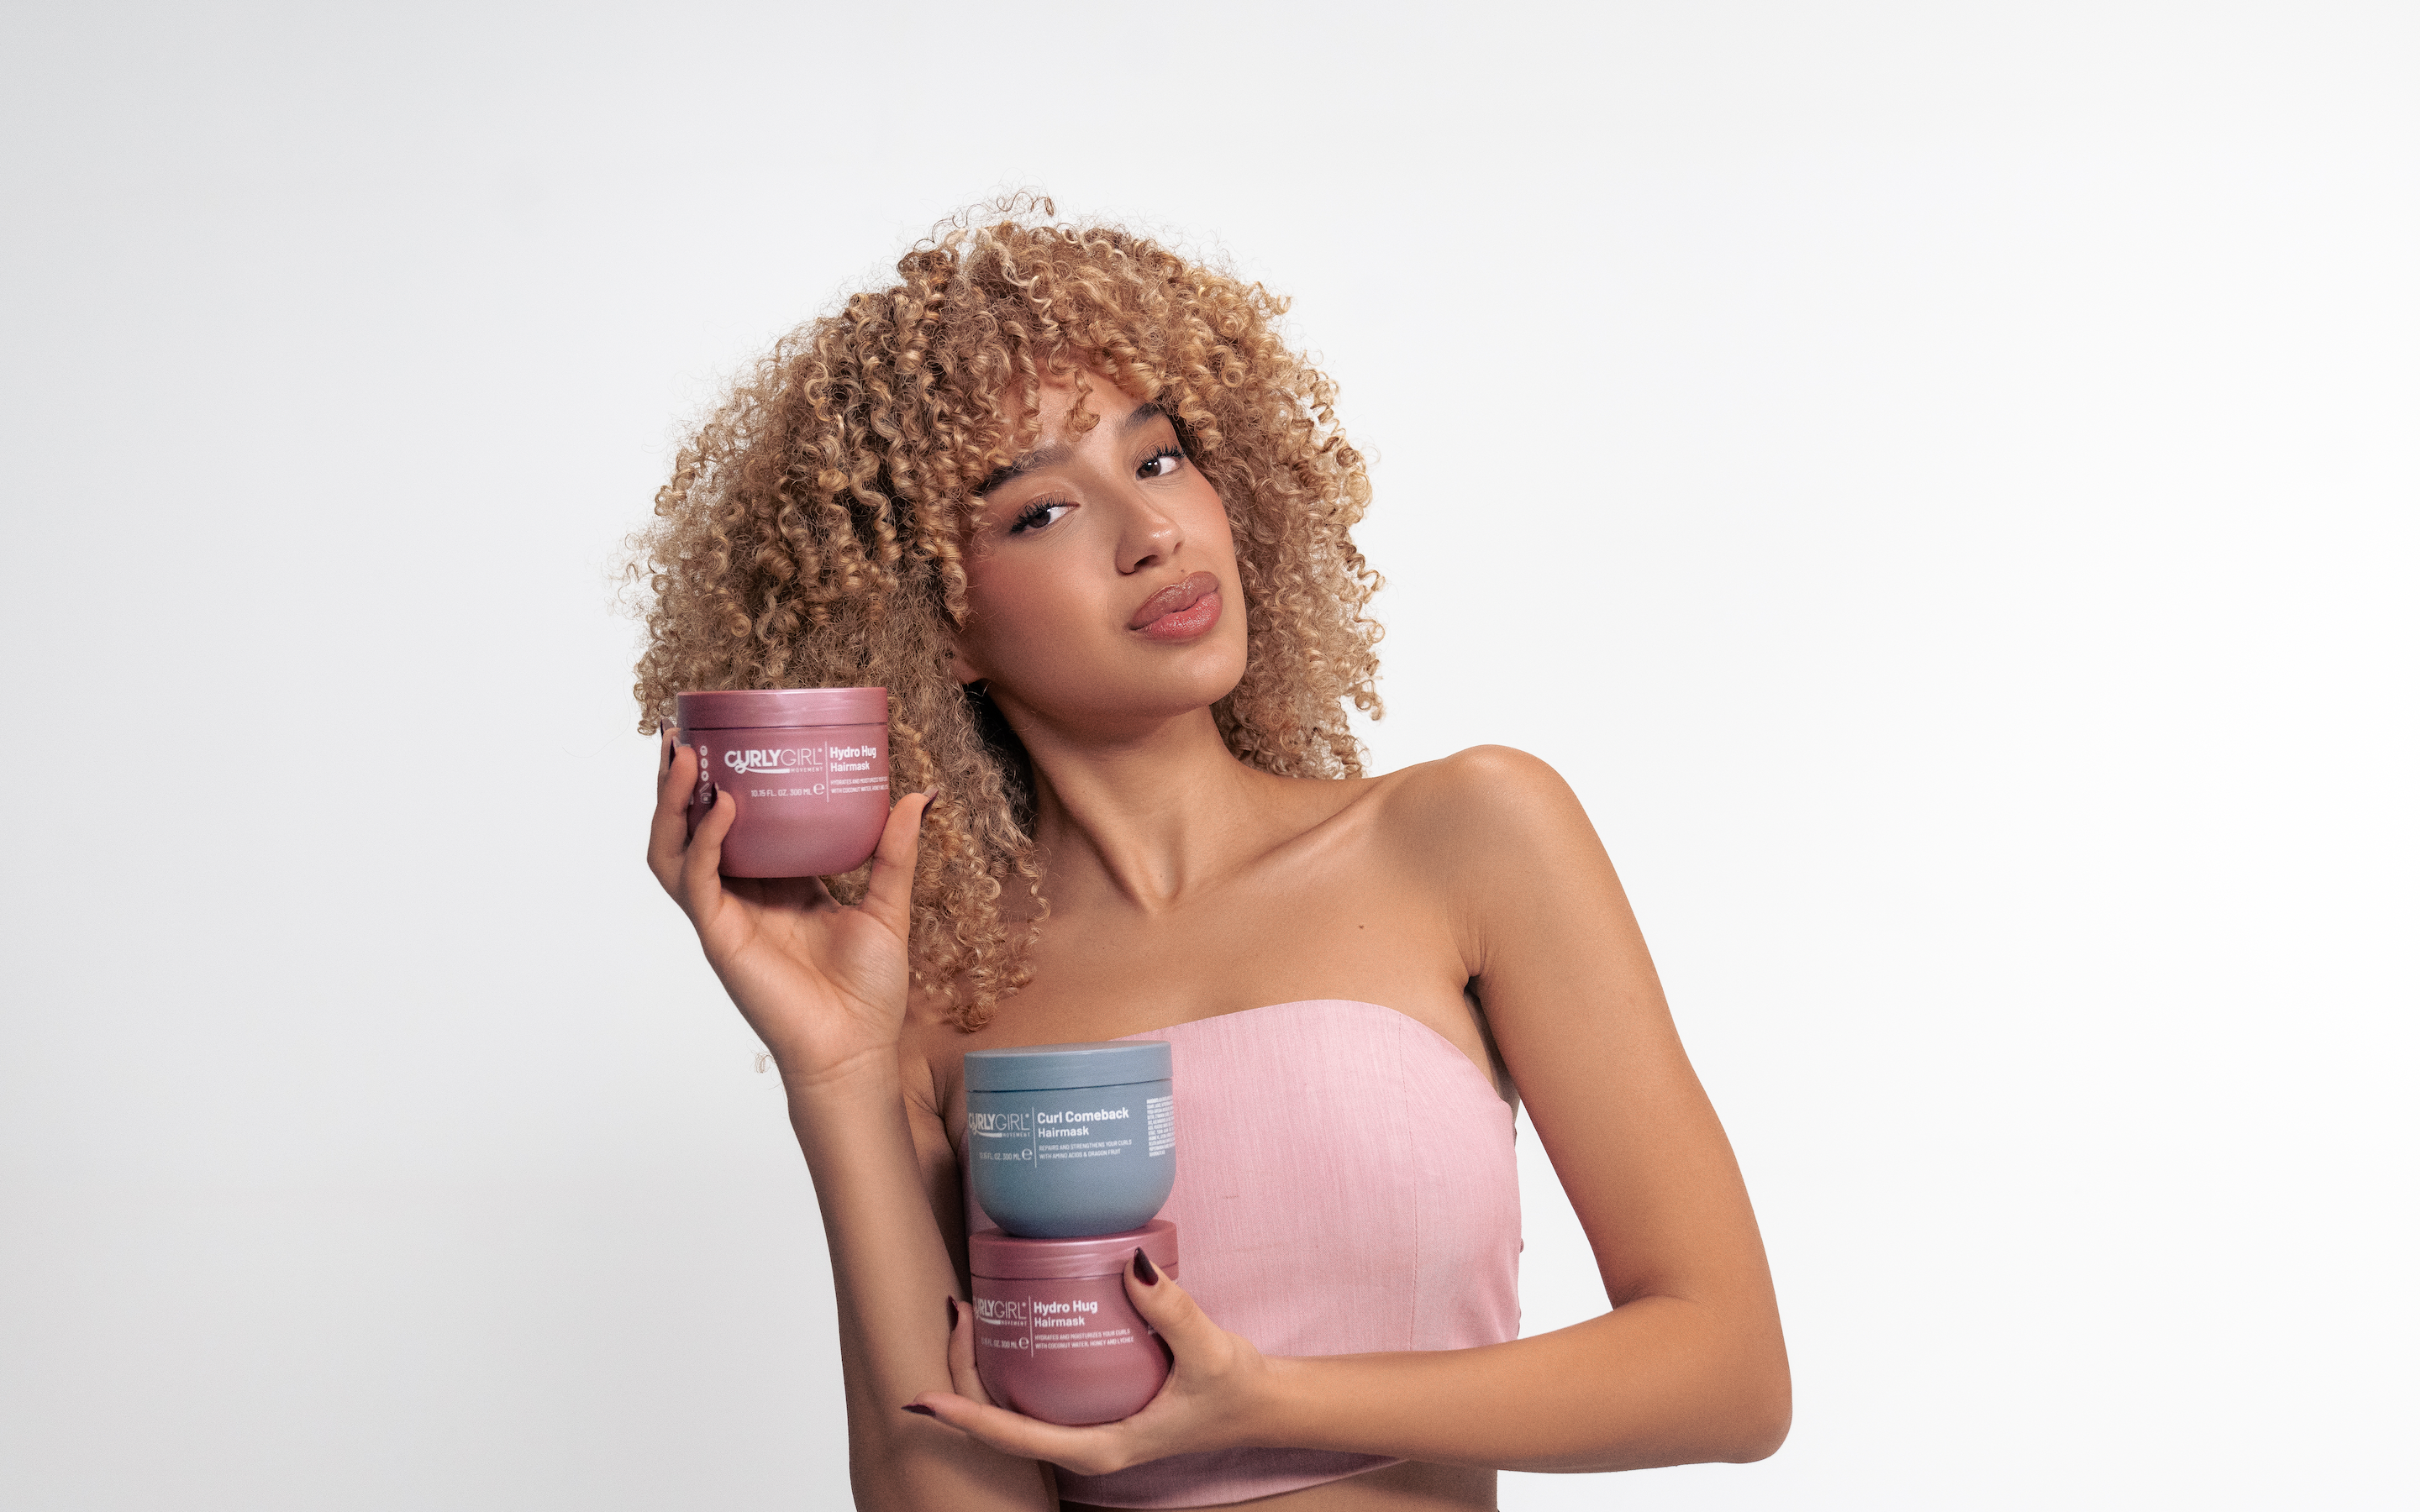 Meet our new hair masks: The Hydro Hug and Curl Comeback masks